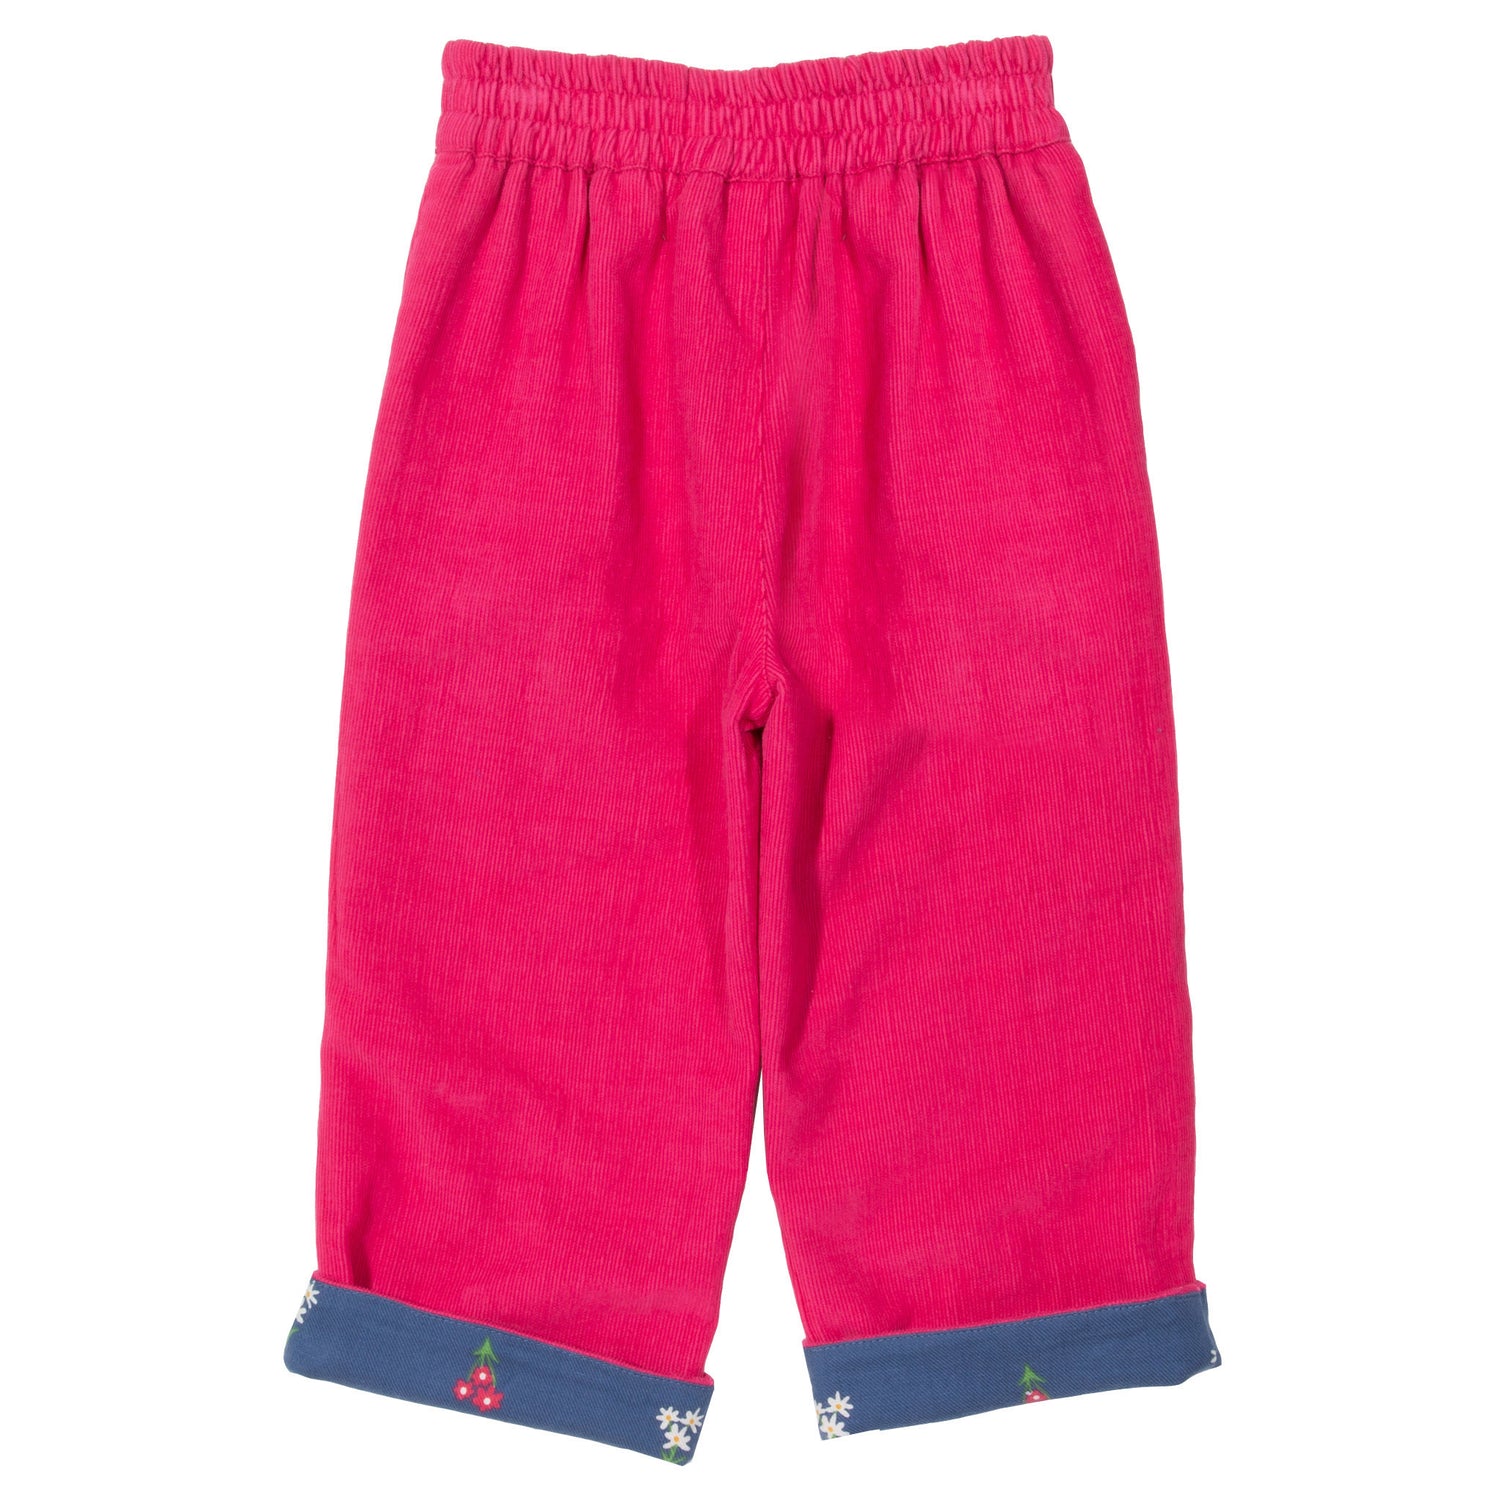 Inside of posy trousers - pink cord